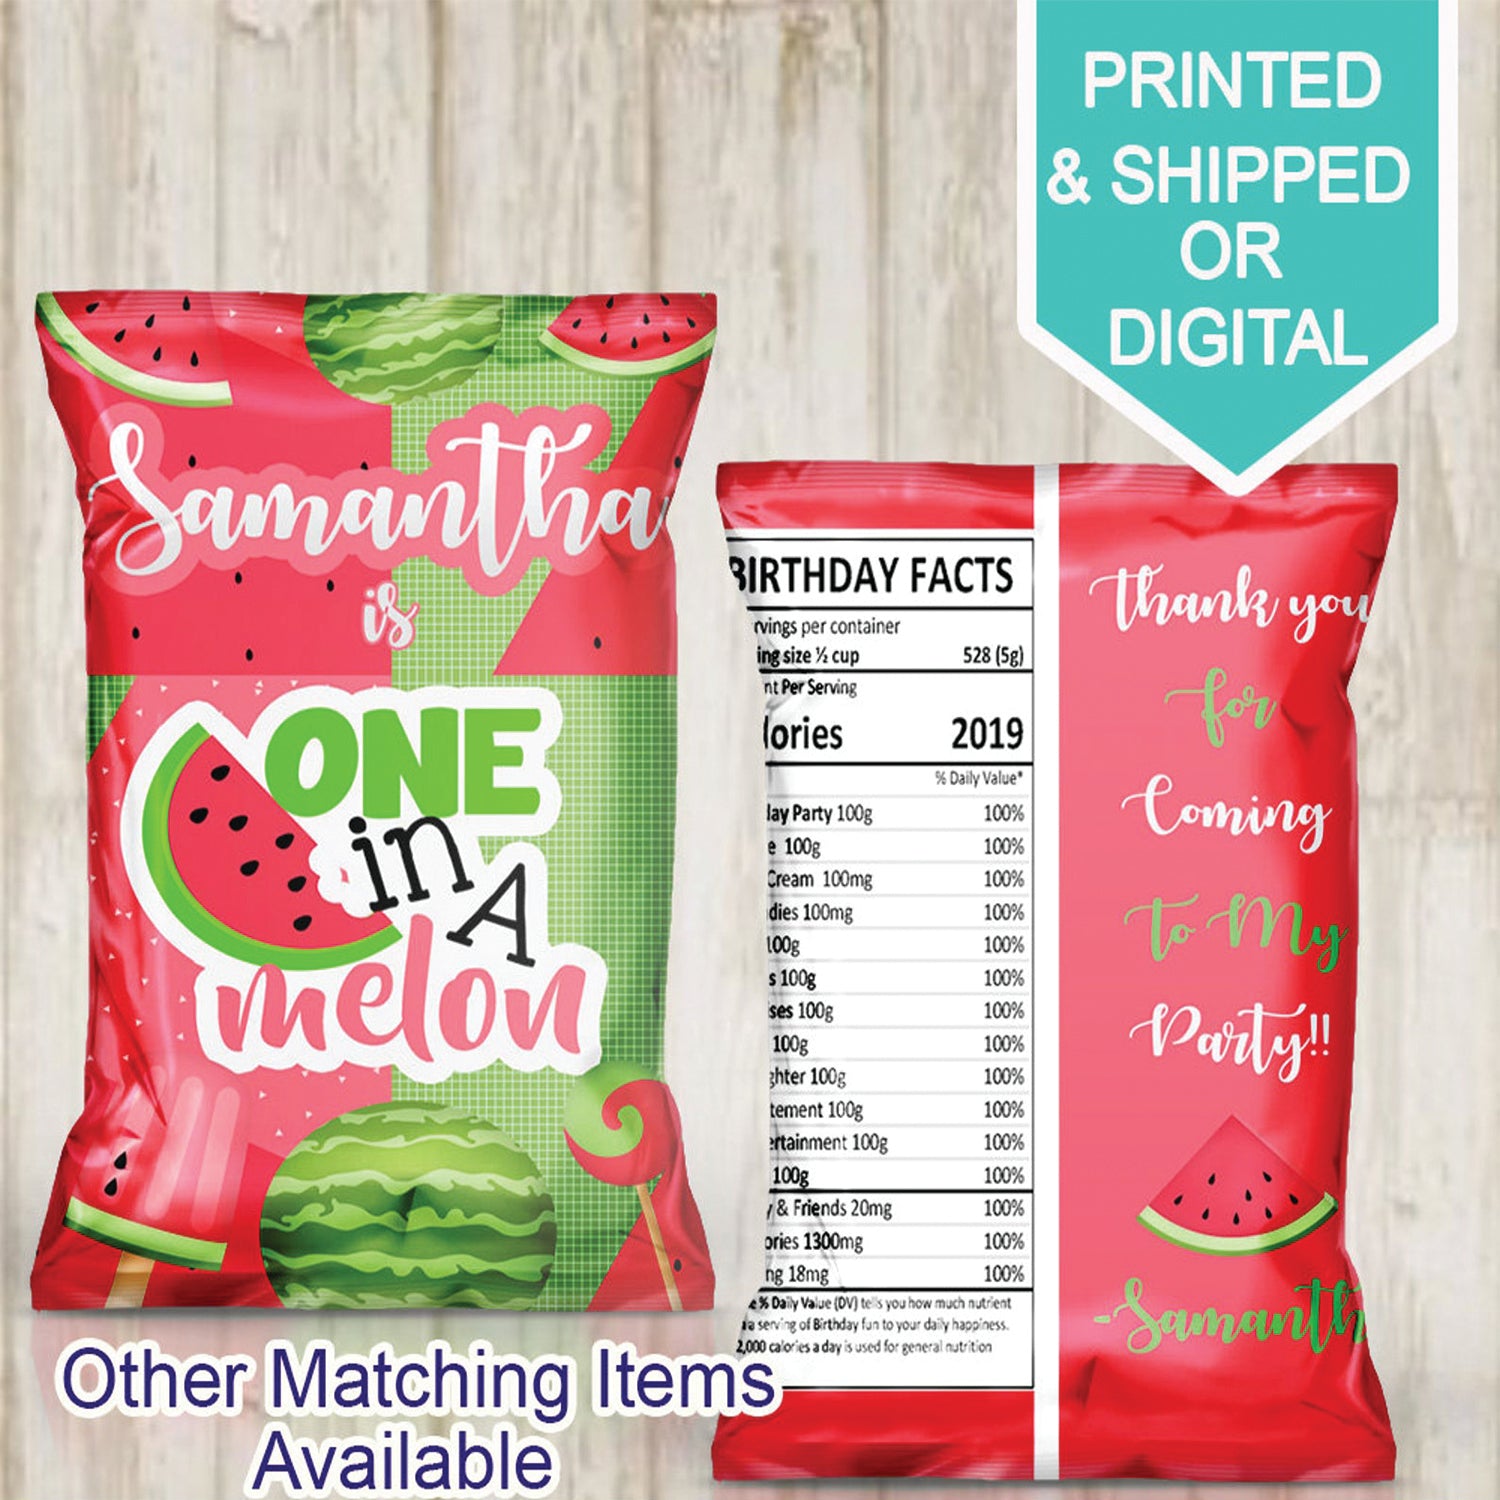 How to Make Custom Chip Bags with Cricut (TEMPLATE) - Caught by Design